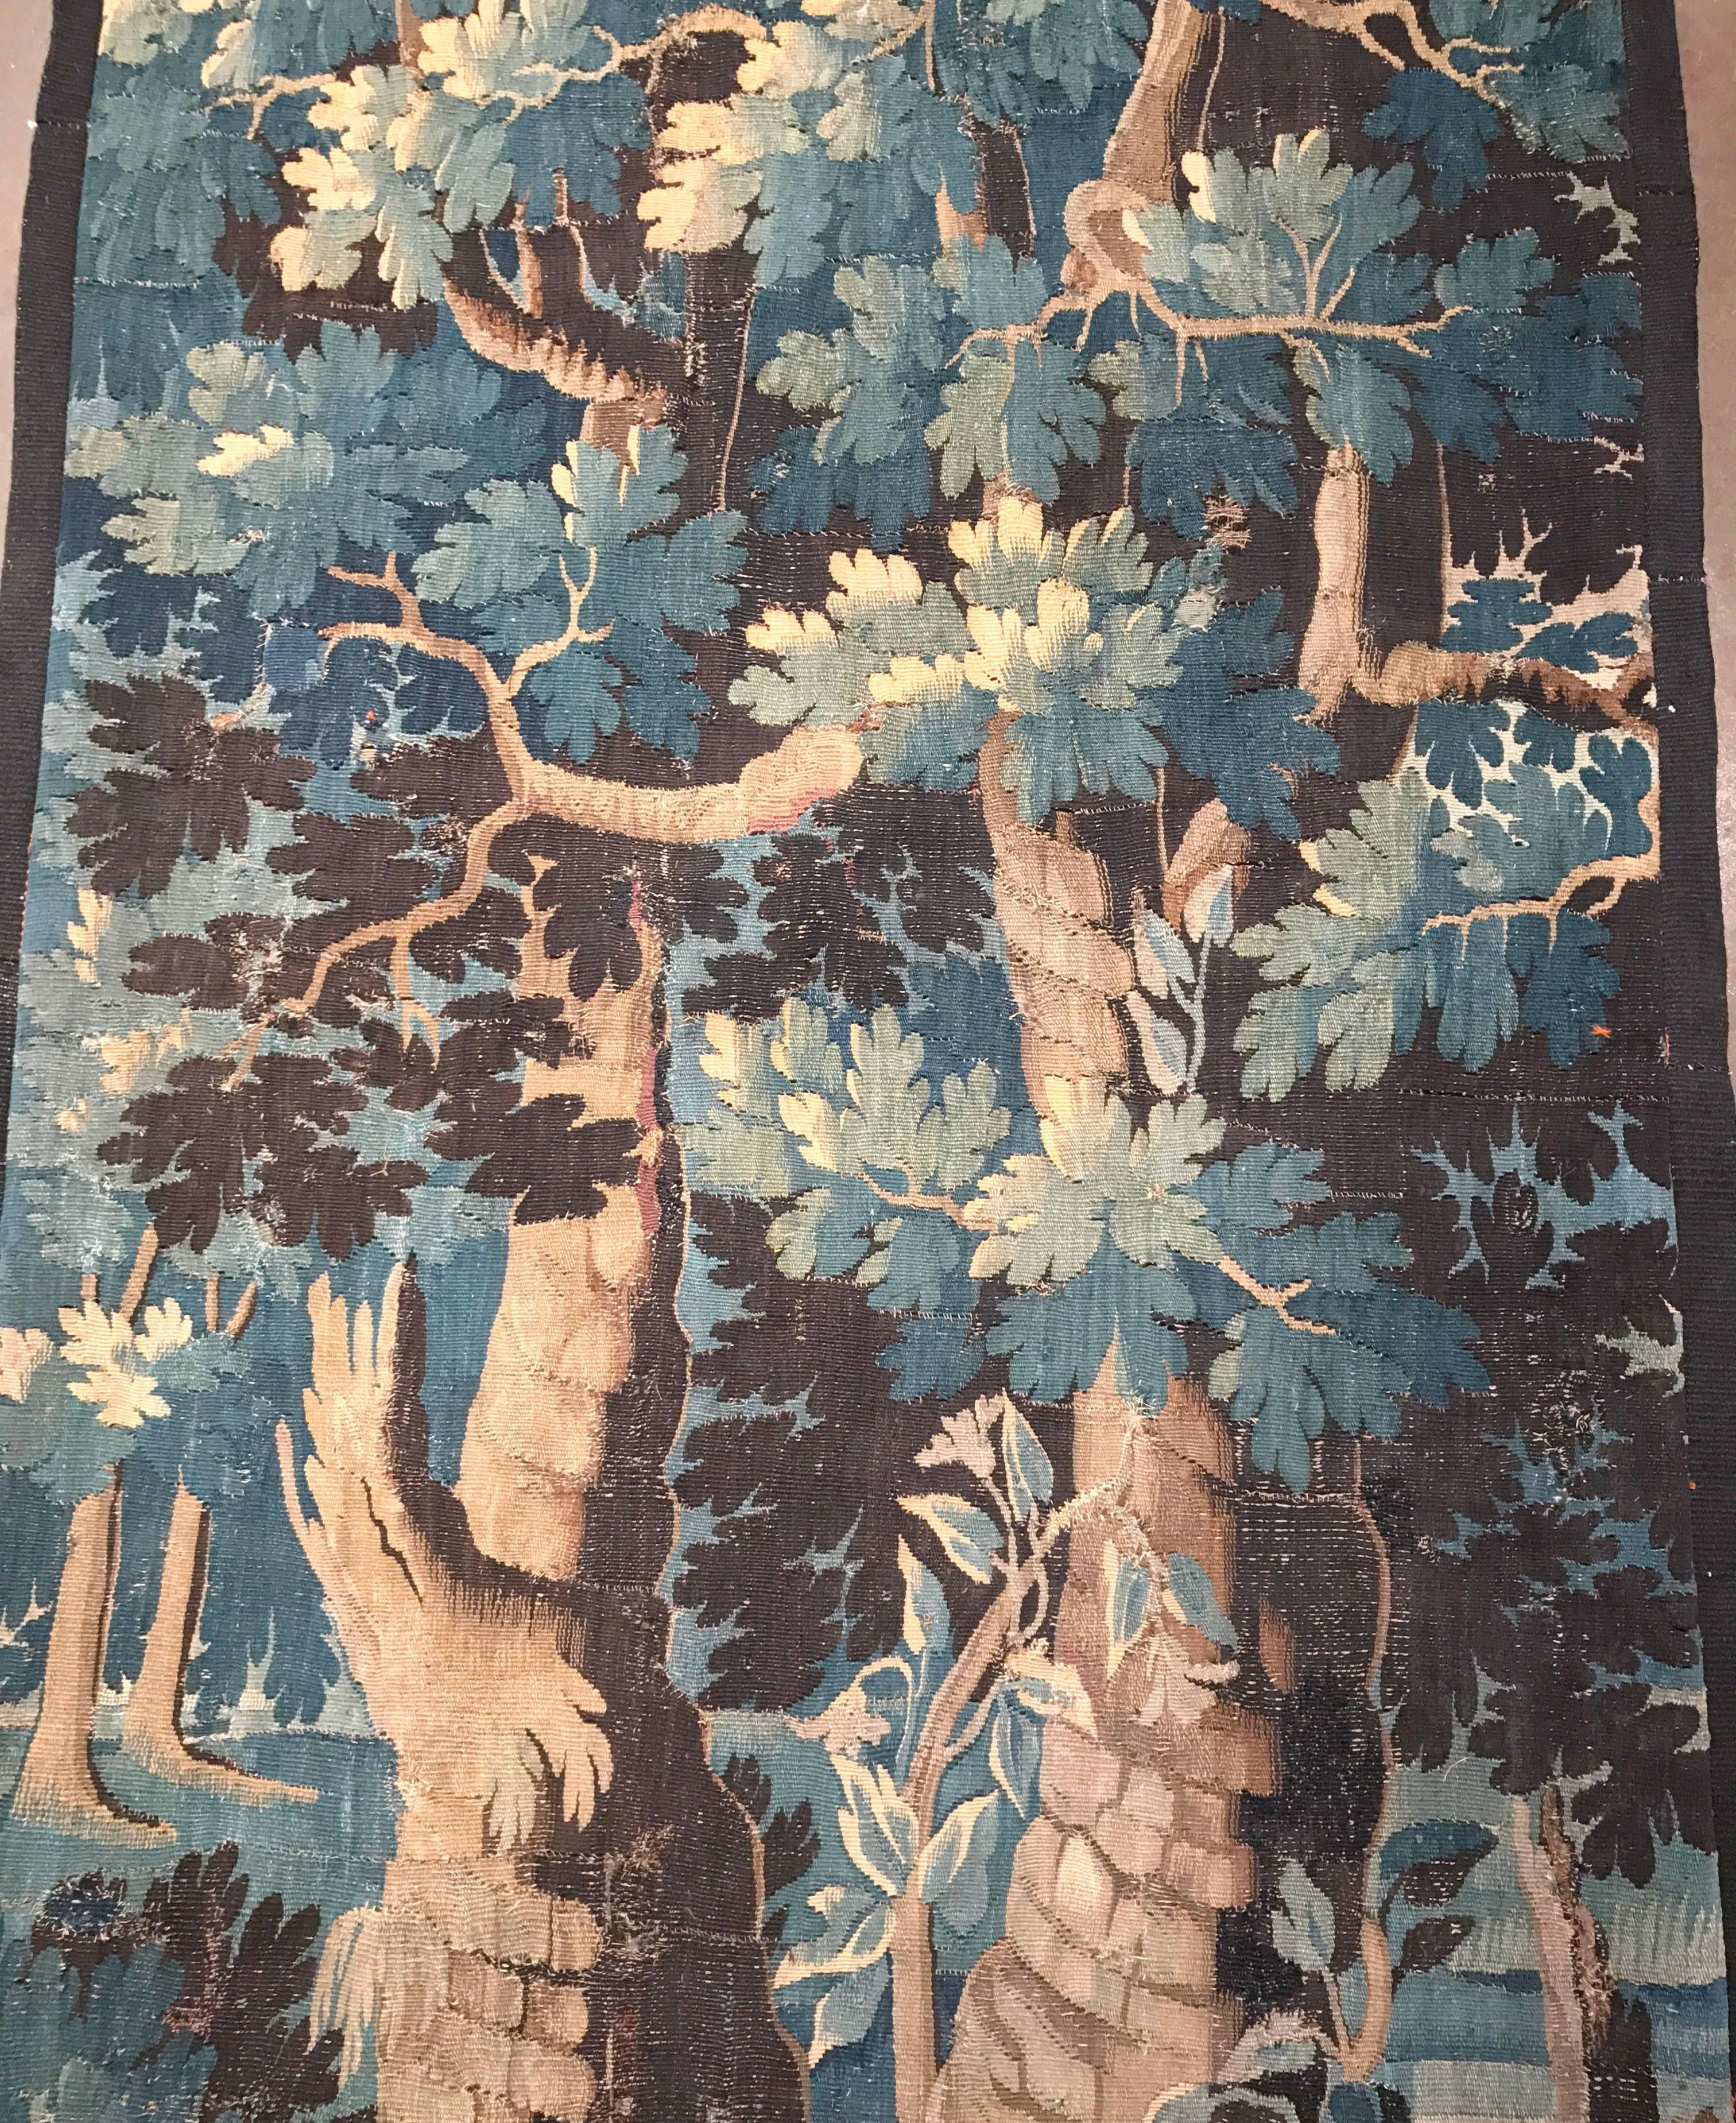 Hand-Woven 18th Century French Verdure Aubusson Tapestry with Trees and Foliage